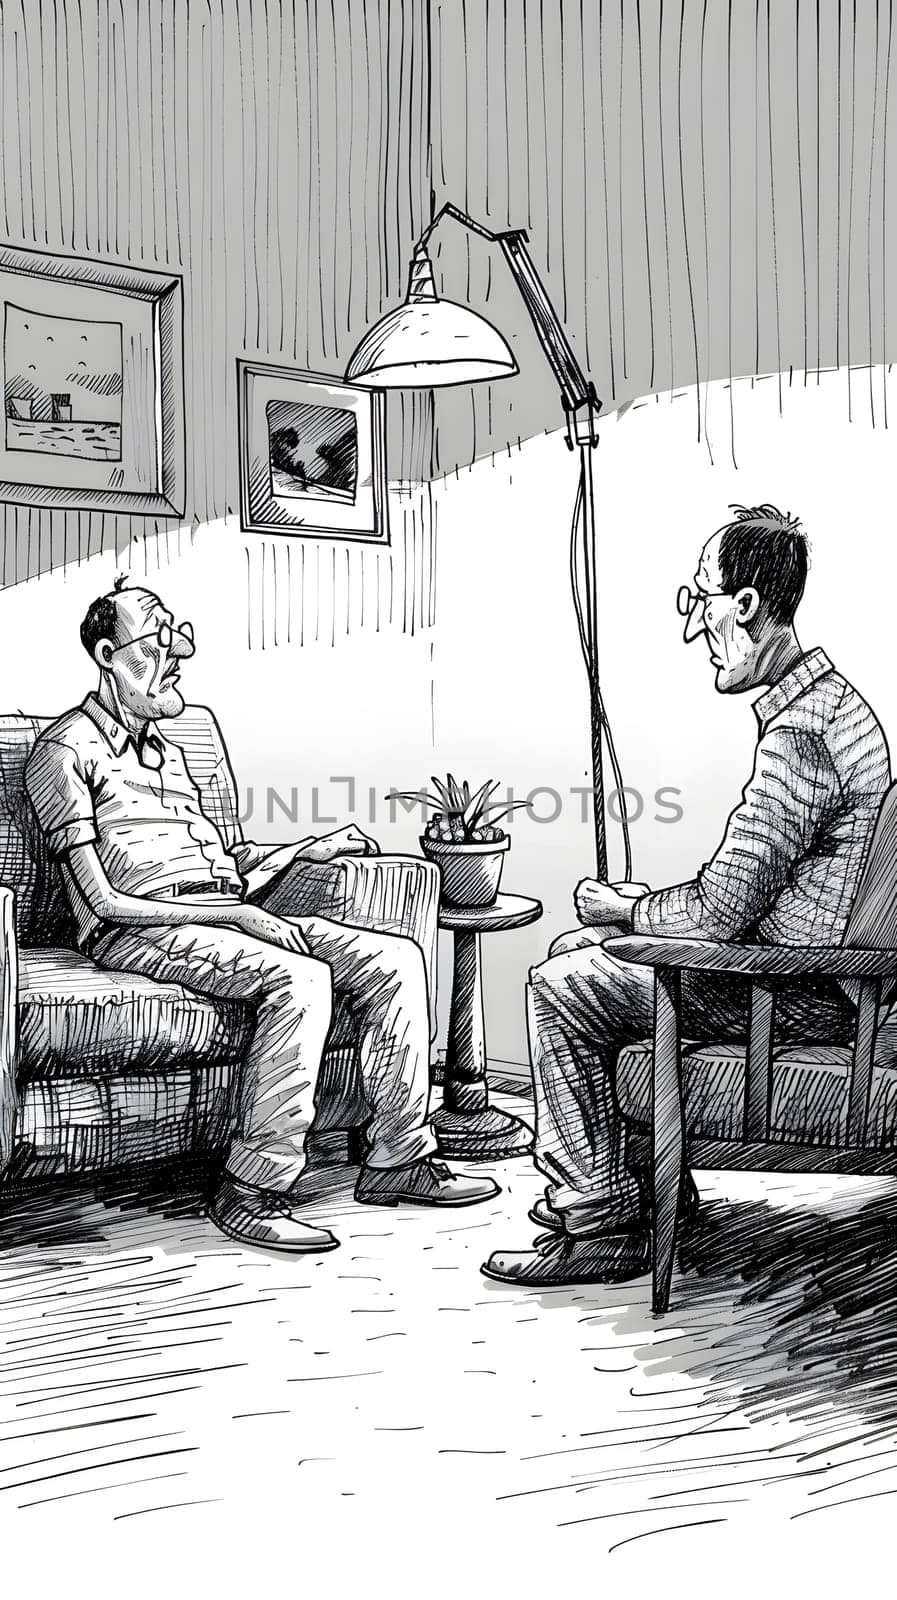 Two individuals are seated in monochrome chairs in an artfilled living room, engaging in conversation. The room is decorated with paintings, illustrations, and a houseplant